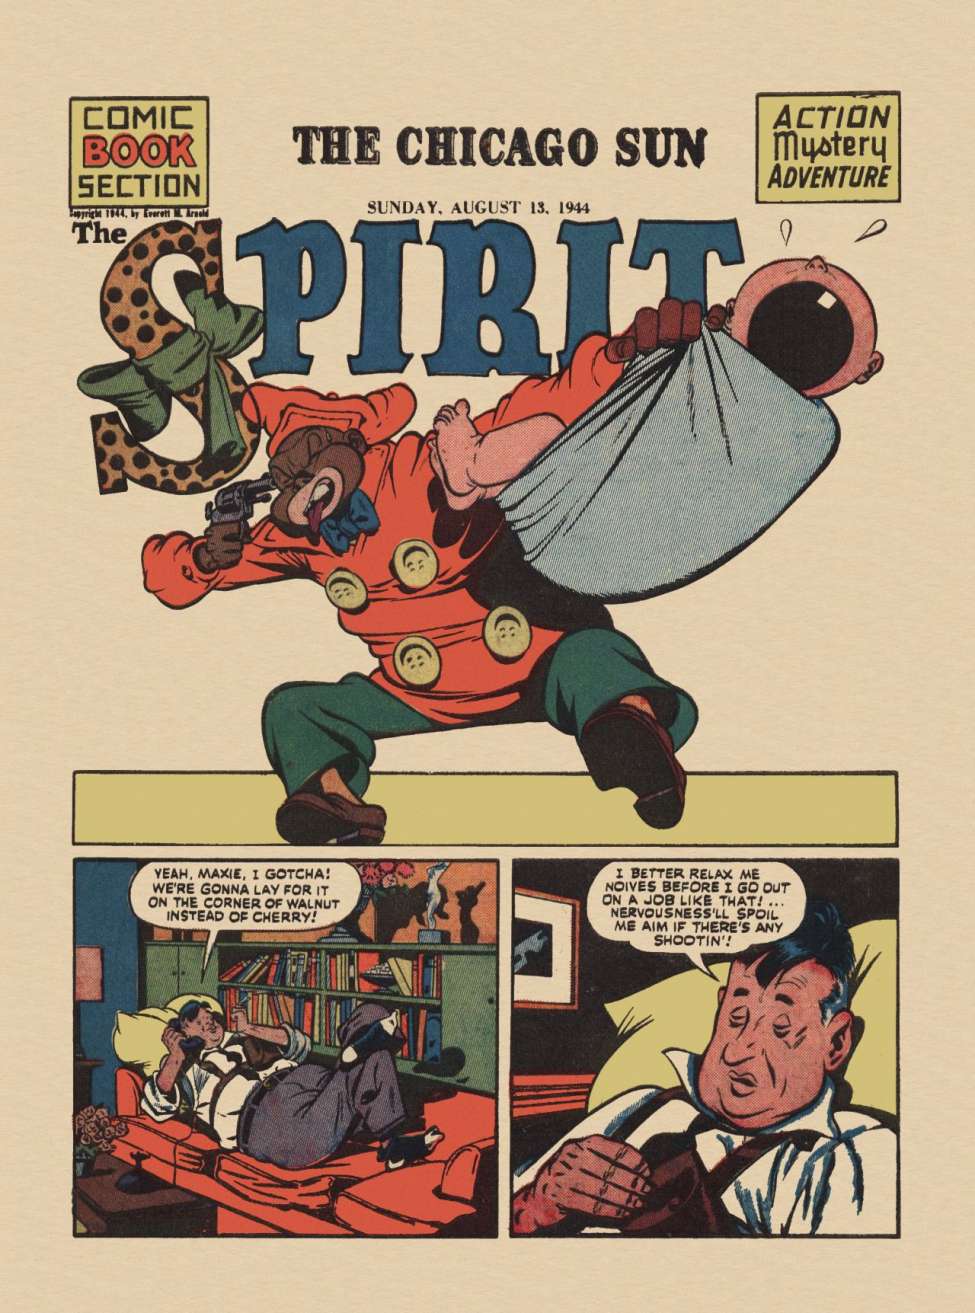 Comic Book Cover For The Spirit (1944-08-13) - Chicago Sun